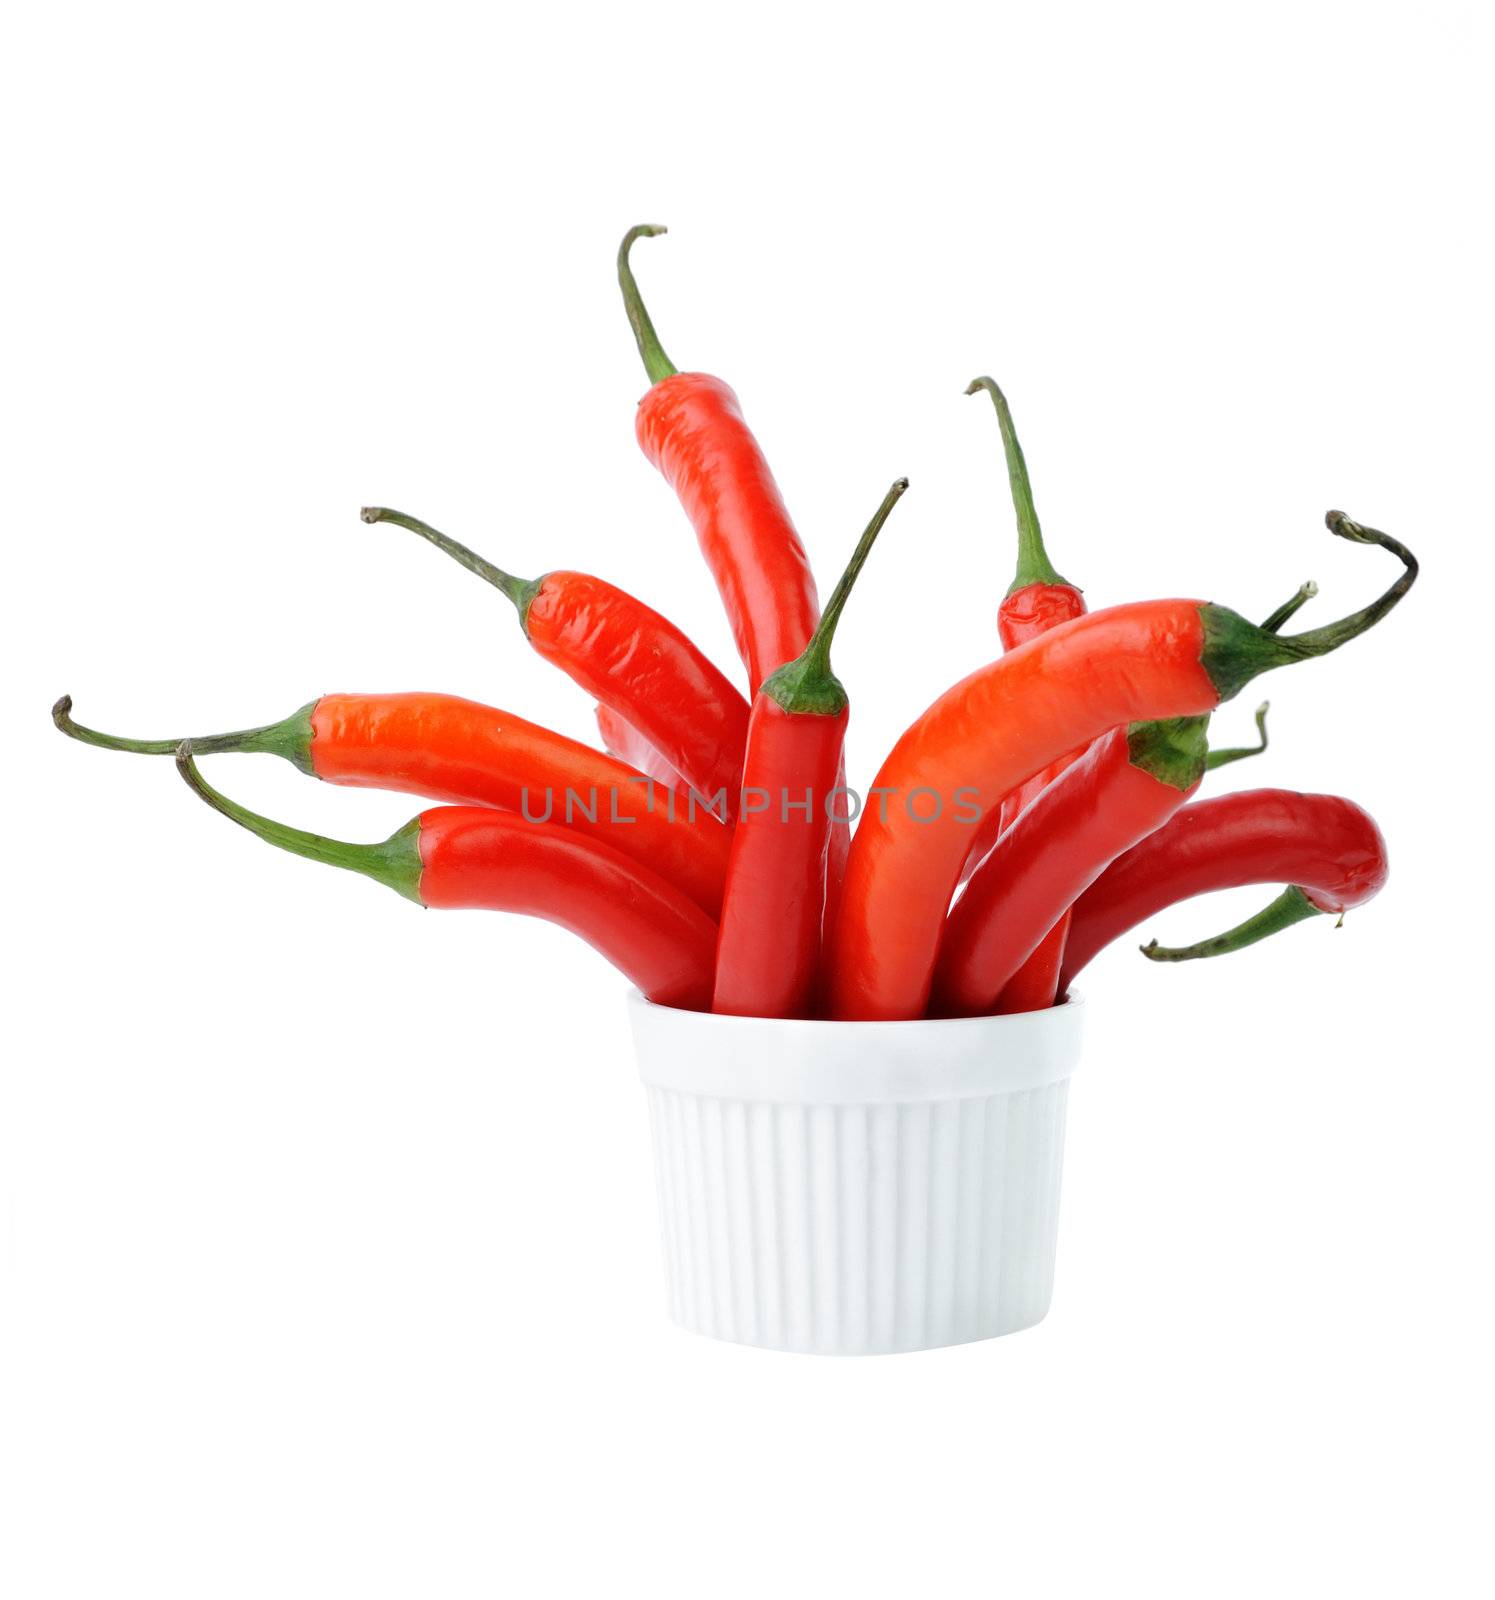 An image of red hot peppers in white bowl